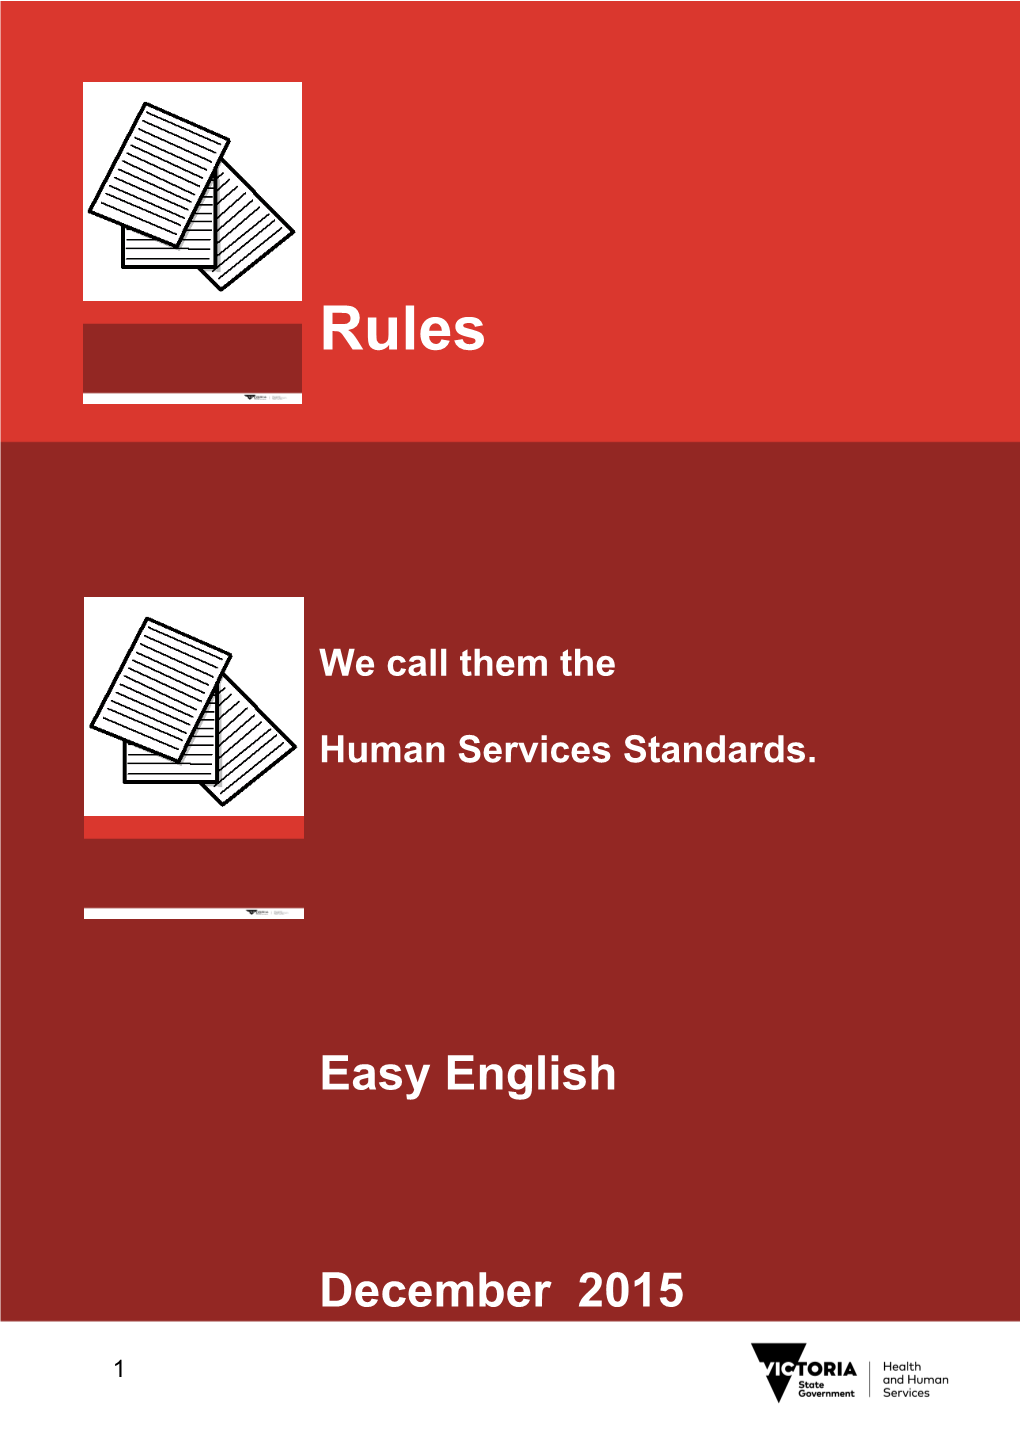 Rules: We Call Them the Human Services Standards